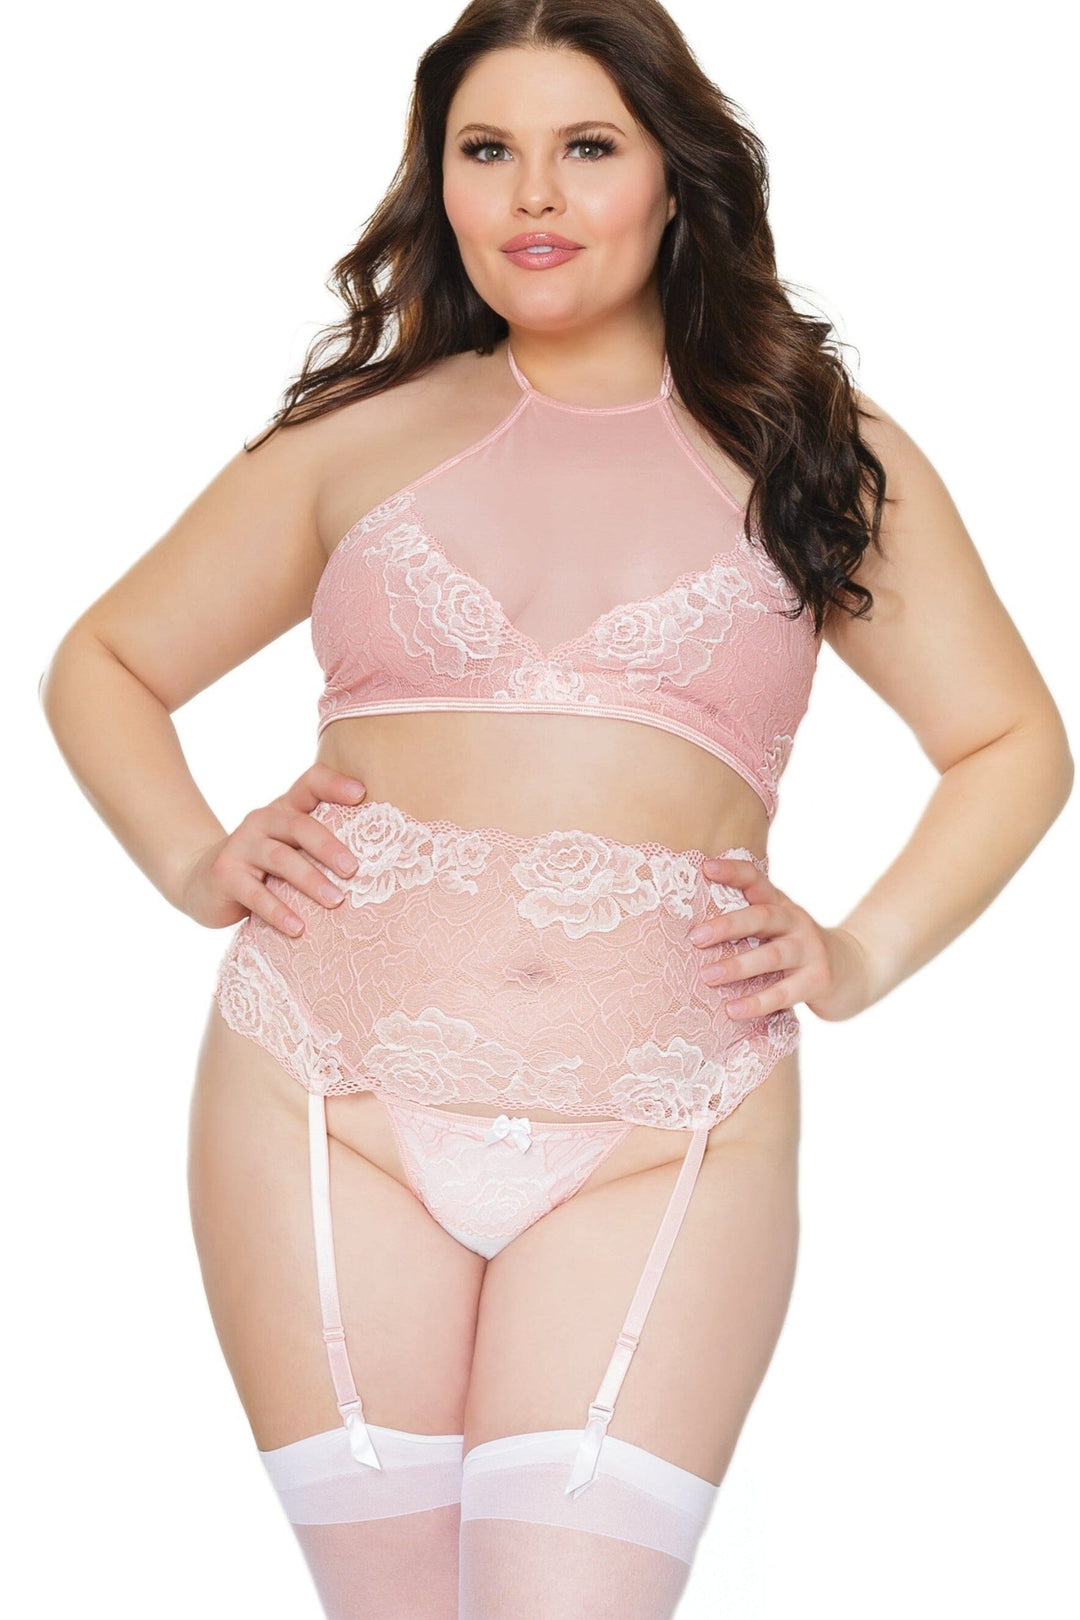 Lace Halter Crop Top And Matching G-String | Plus Size-Lingerie Sets-Coquette-Pink-Q-SEXYSHOES.COM